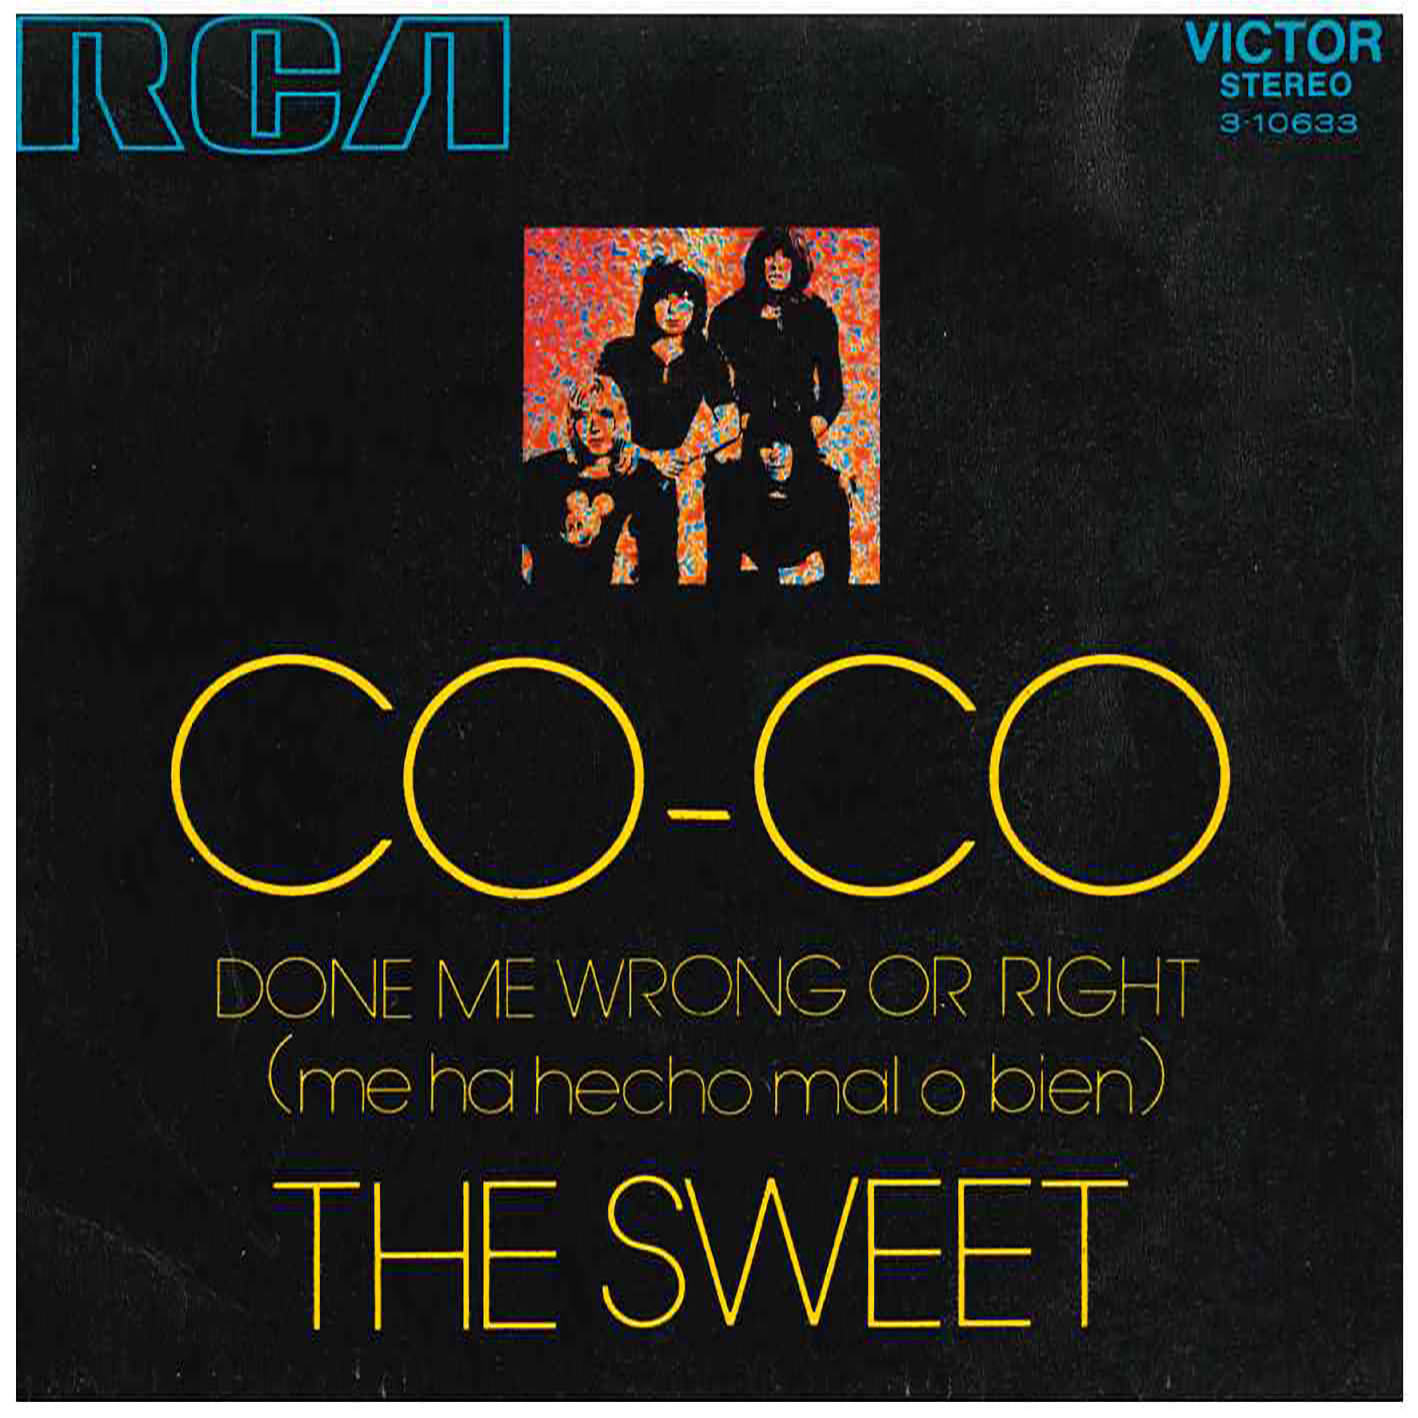 The Sweet – Co-Co